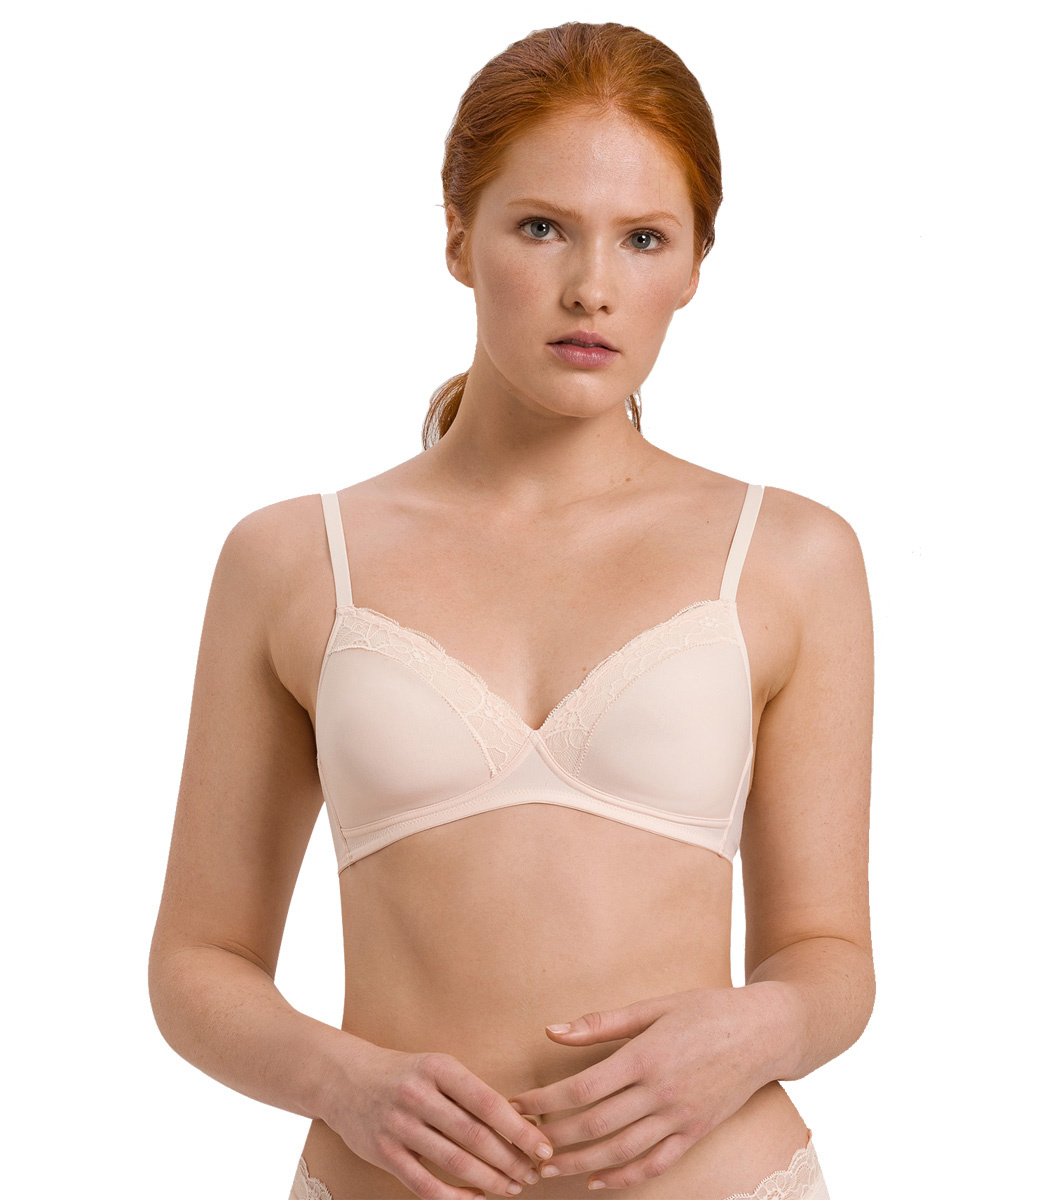 Women's White color Half padded Bra with flower pattern, size 75C